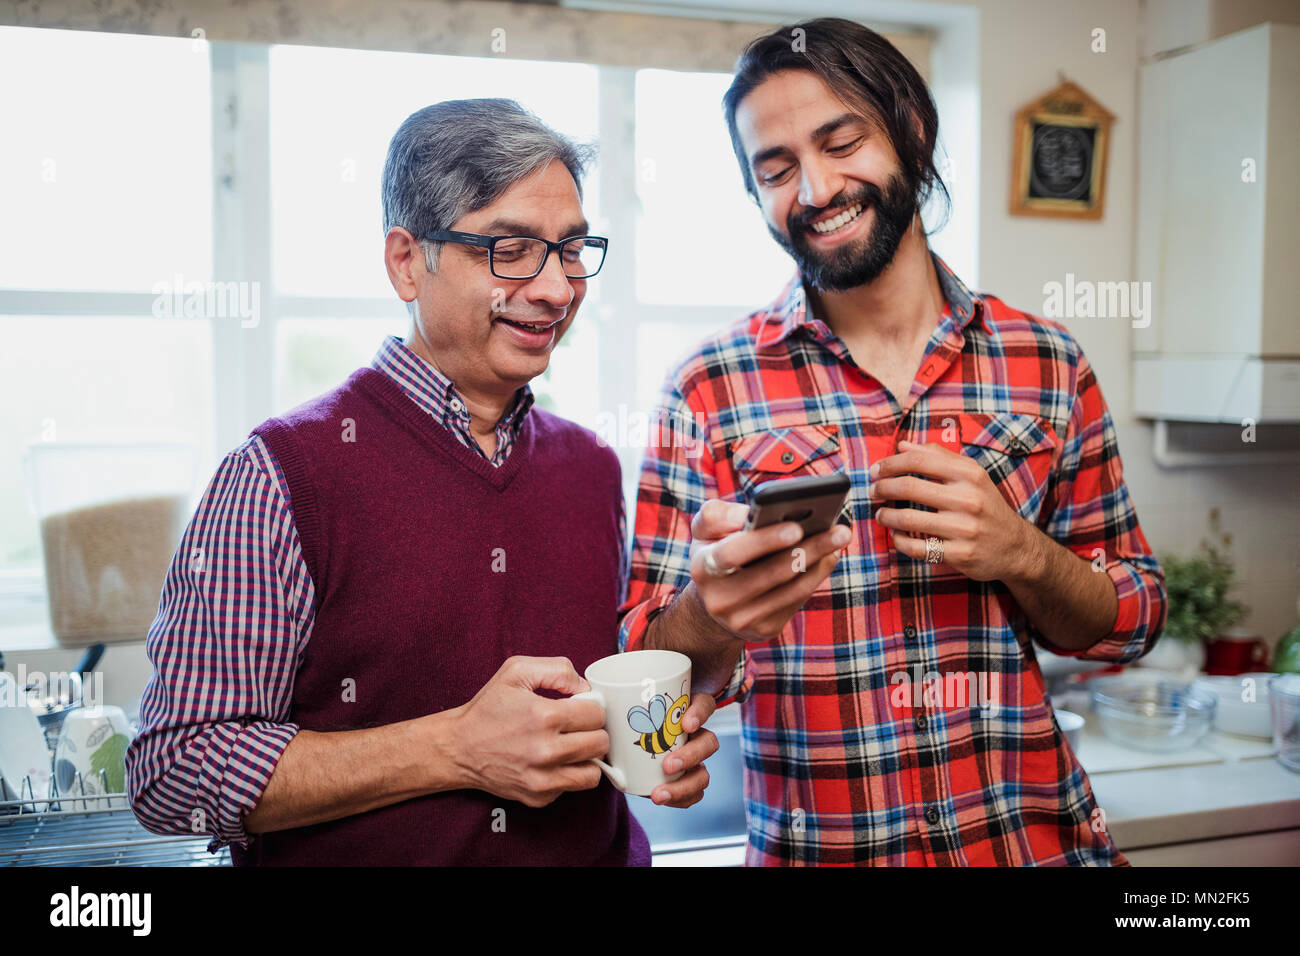 Mid adult man is showing his mature father something on his smart phone. He is holding a mug of tea. Stock Photo